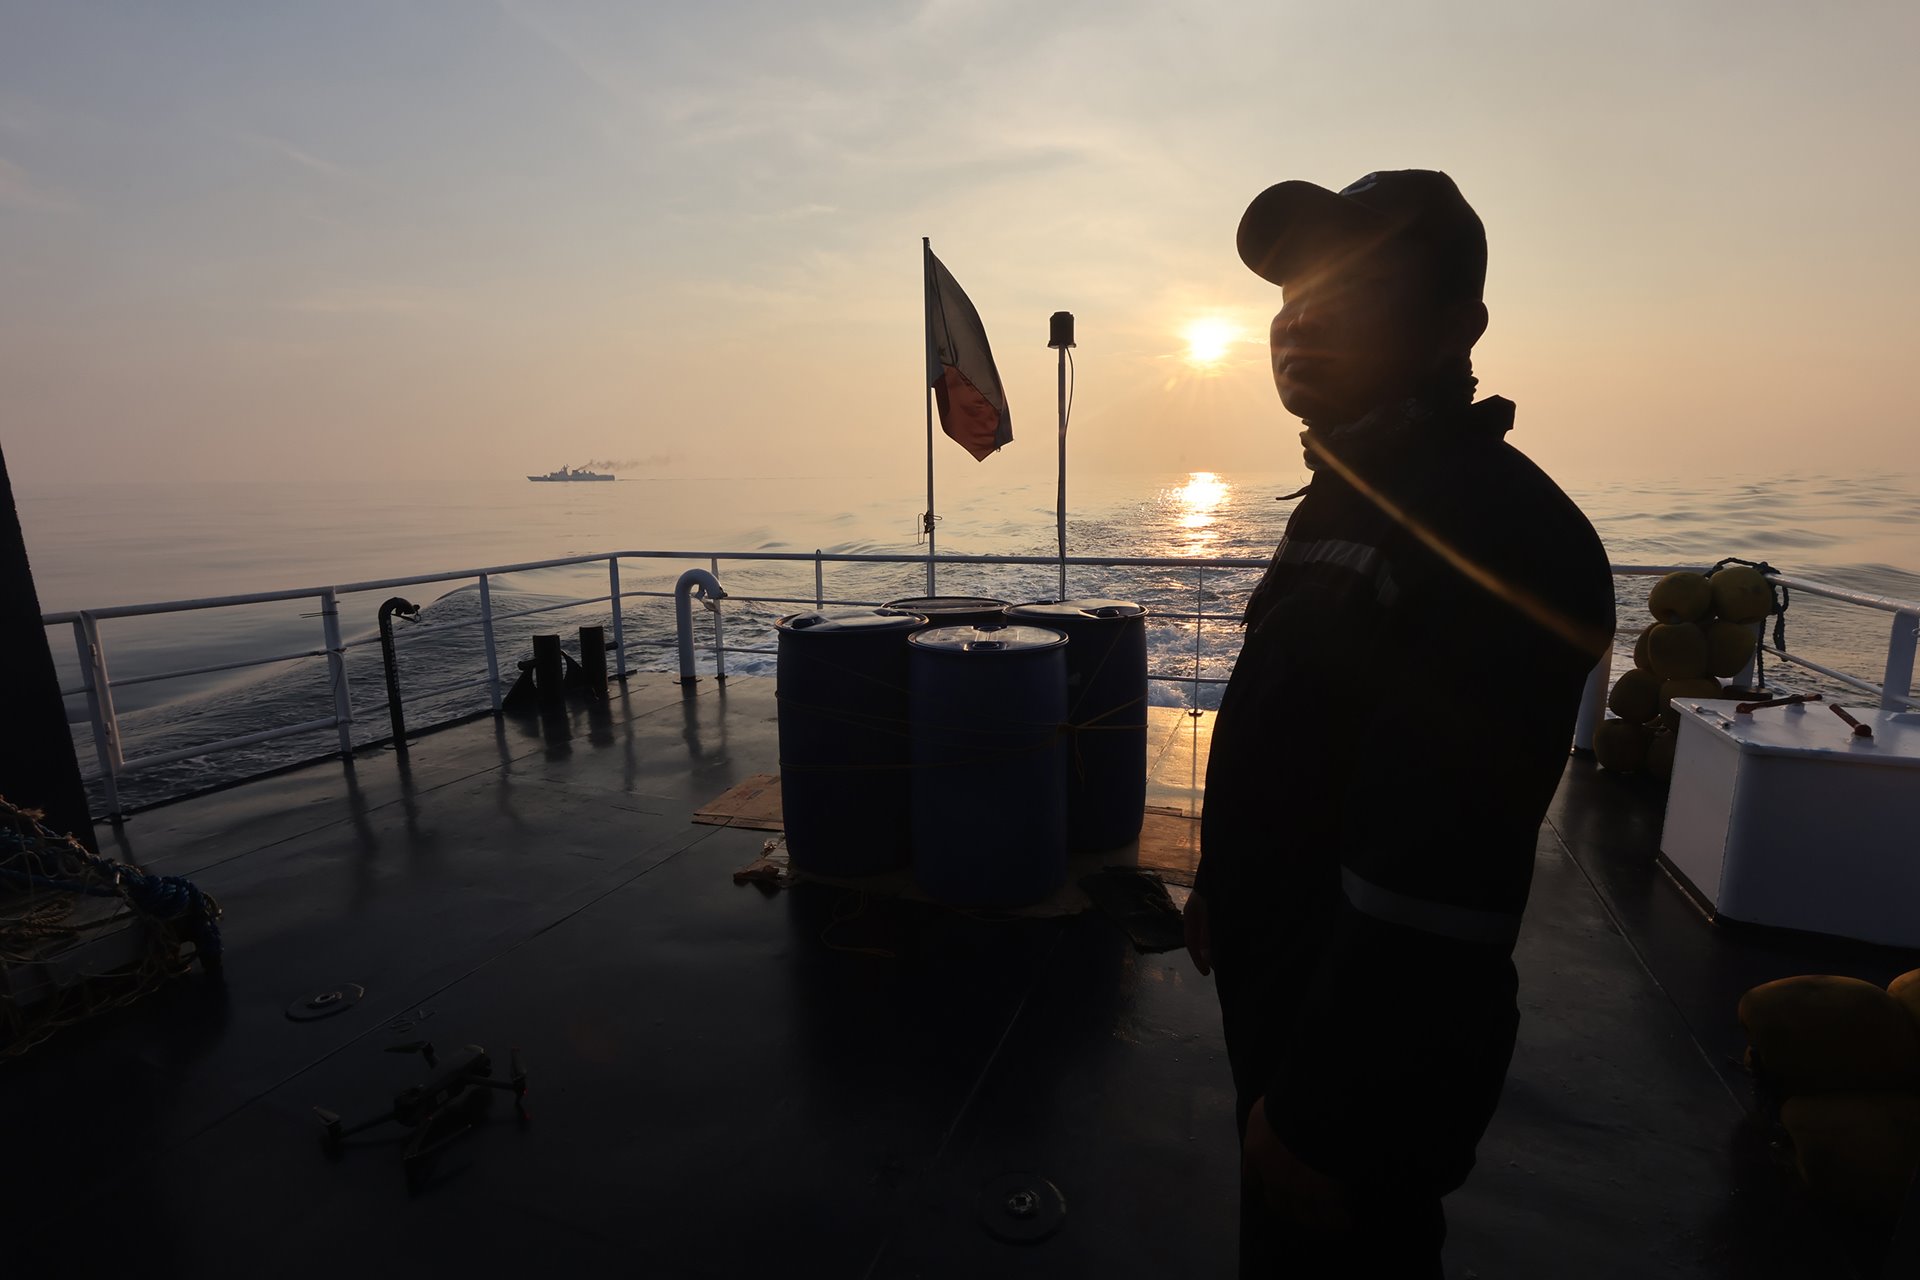 A member of the Bureau of Fisheries and Aquatic Resources stands beside barrels of oil set to be delivered to Filipino fishermen working near Scarborough Shoal, off Zambales province, Philippines.